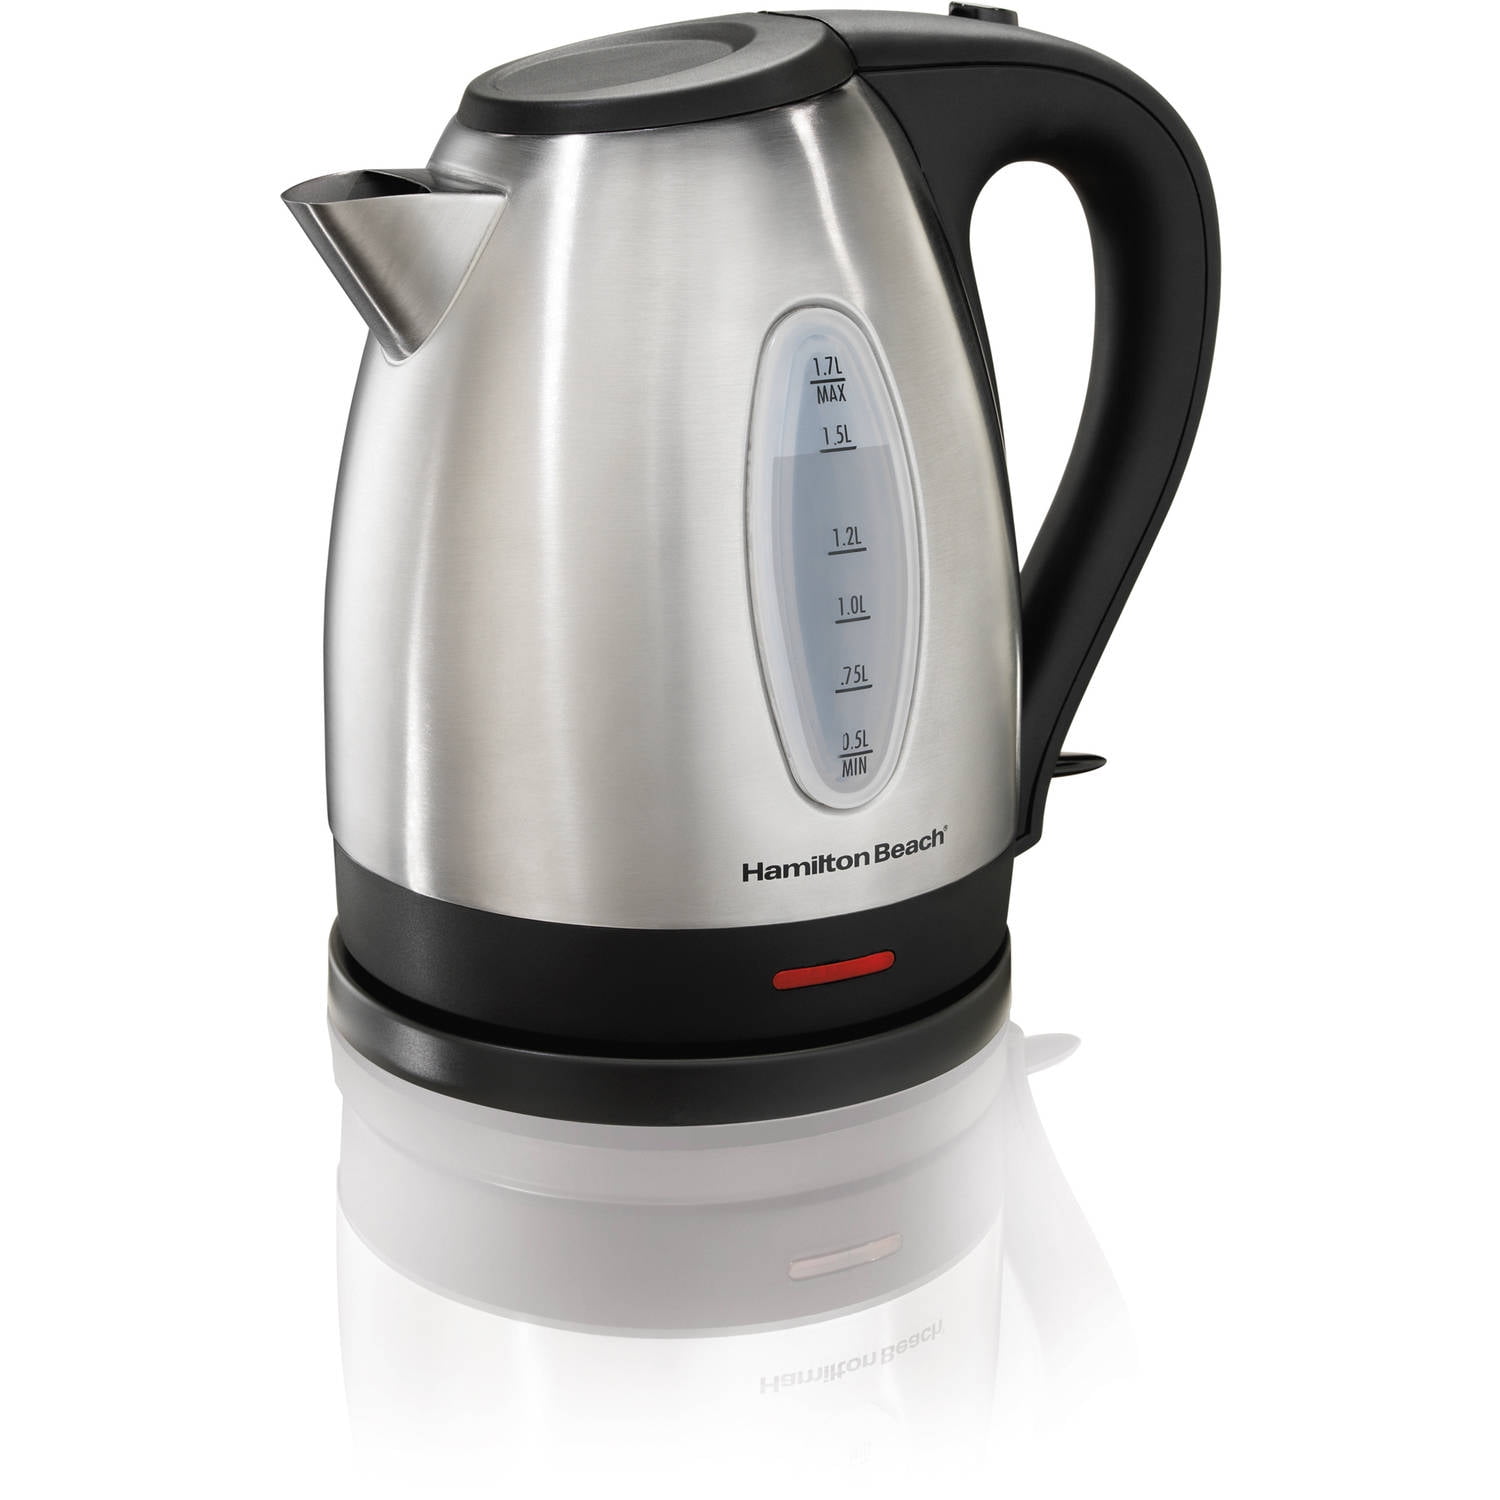 Electric Kettles Are a Dorm Room Essential: 5 to Shop Now